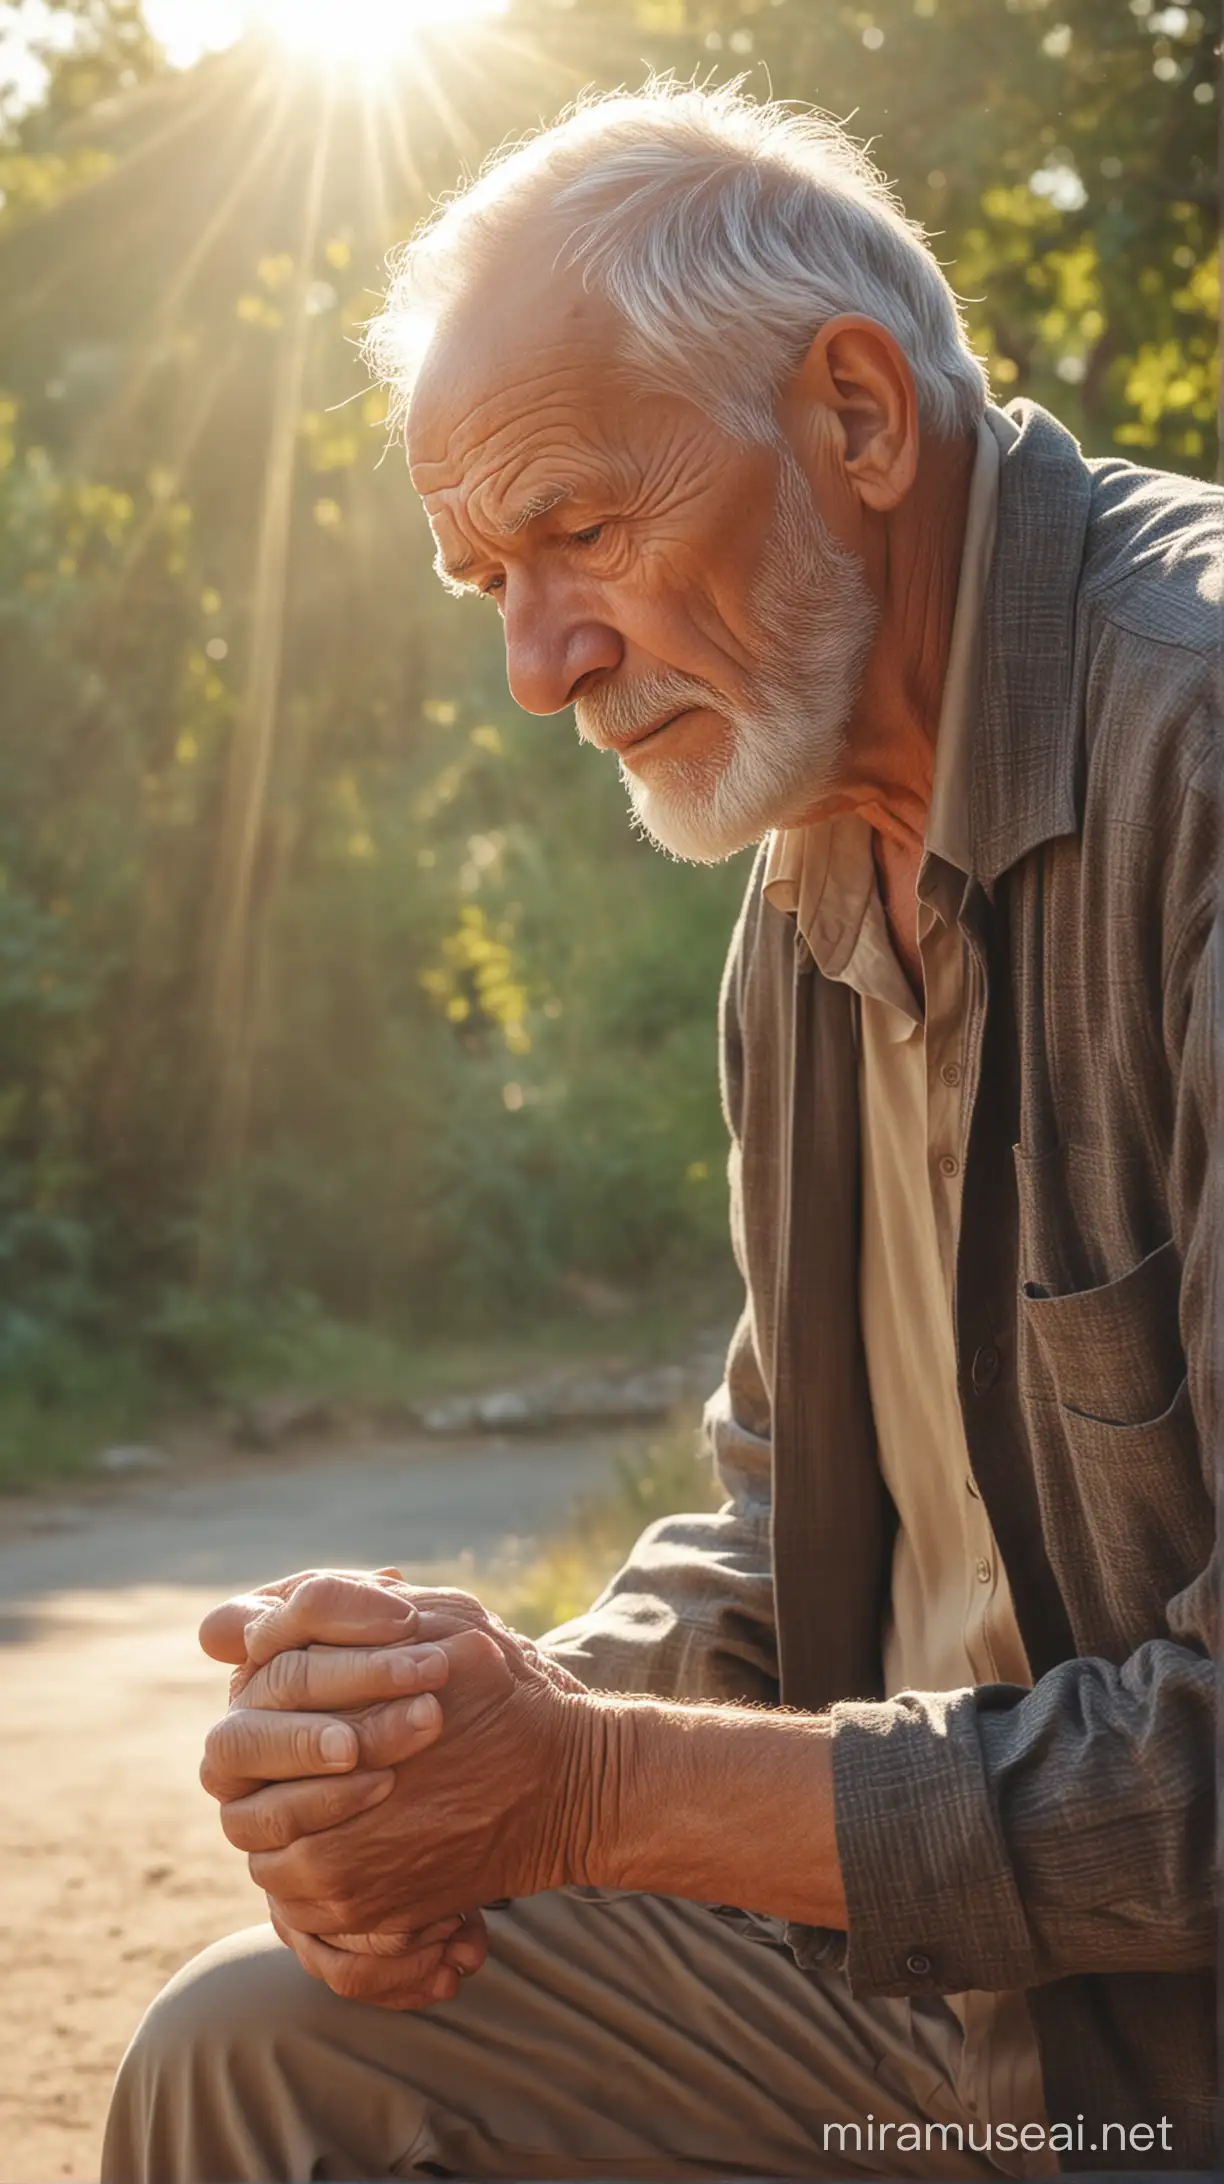 fatigue and weakness old man, natural background, sun light effect, 4k, HDR, morning time weather